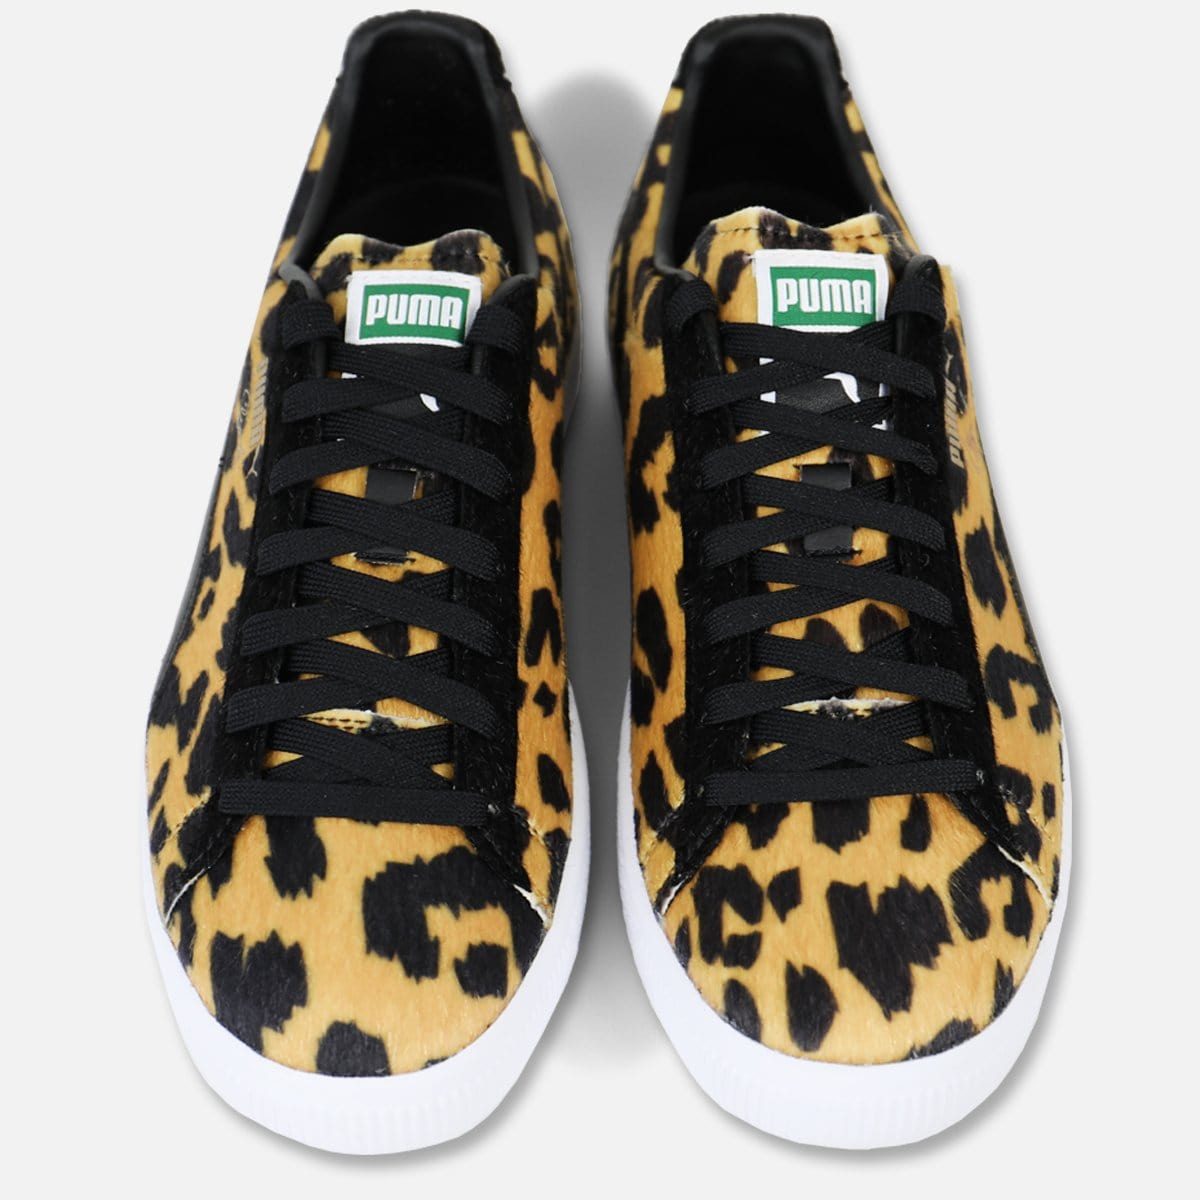 RUVilla.com is where to buy the PUMA Clyde Suits (Cheetah)!